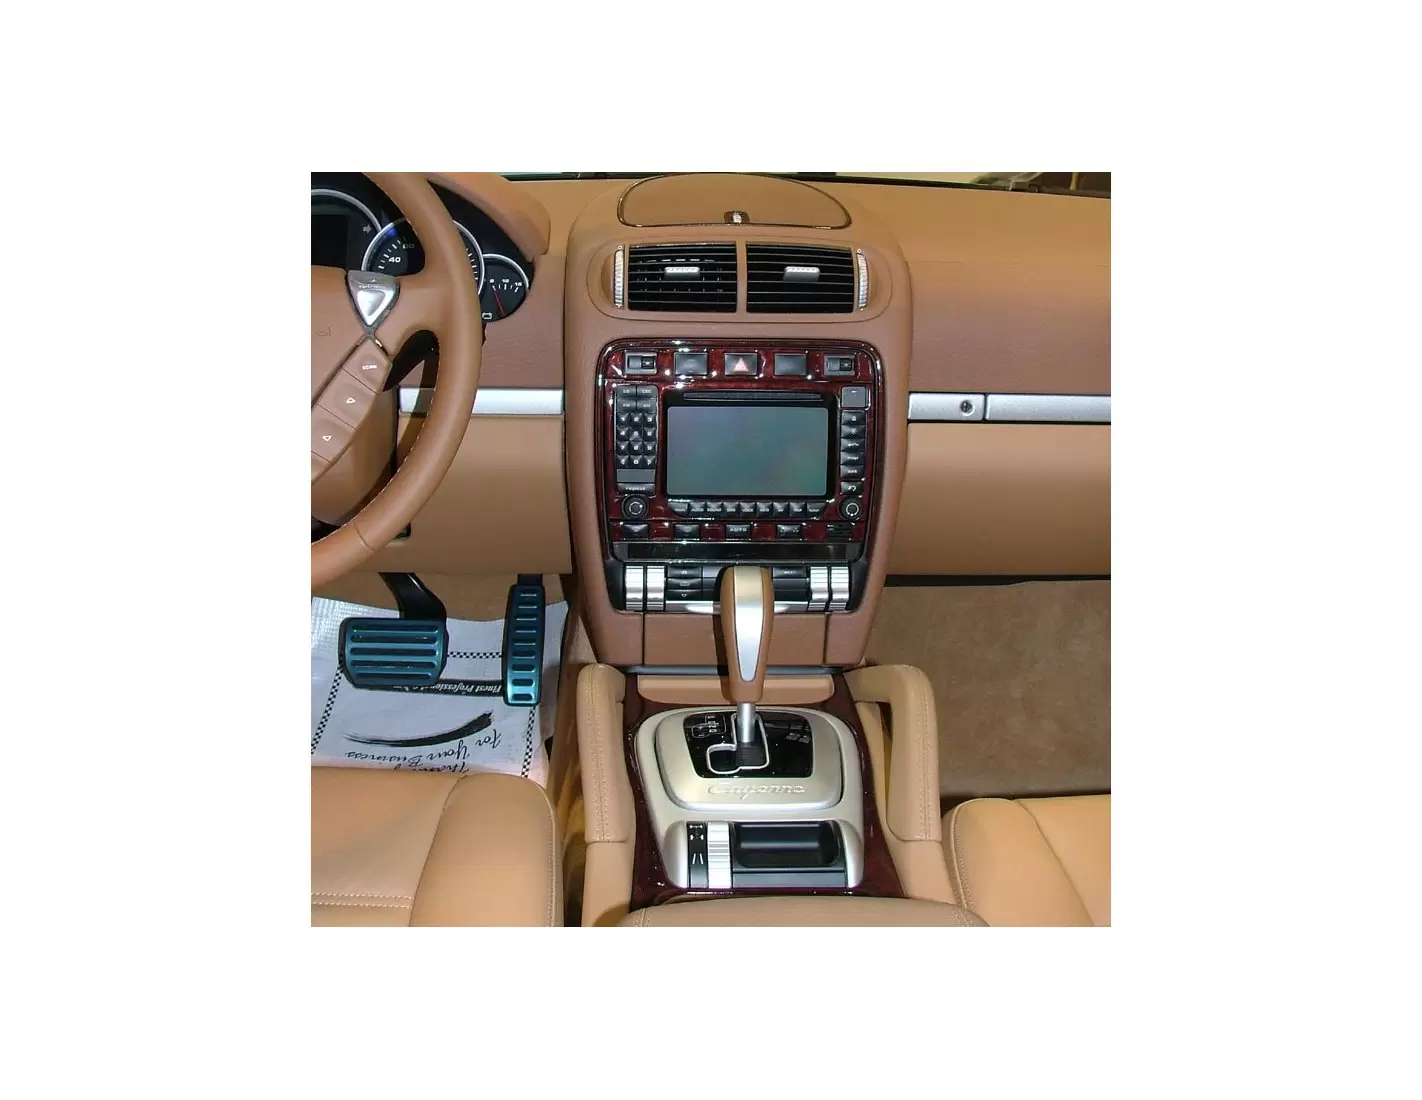 Porsche Cayenee 2003-UP With or Without NAVI Interior BD Dash Trim Kit